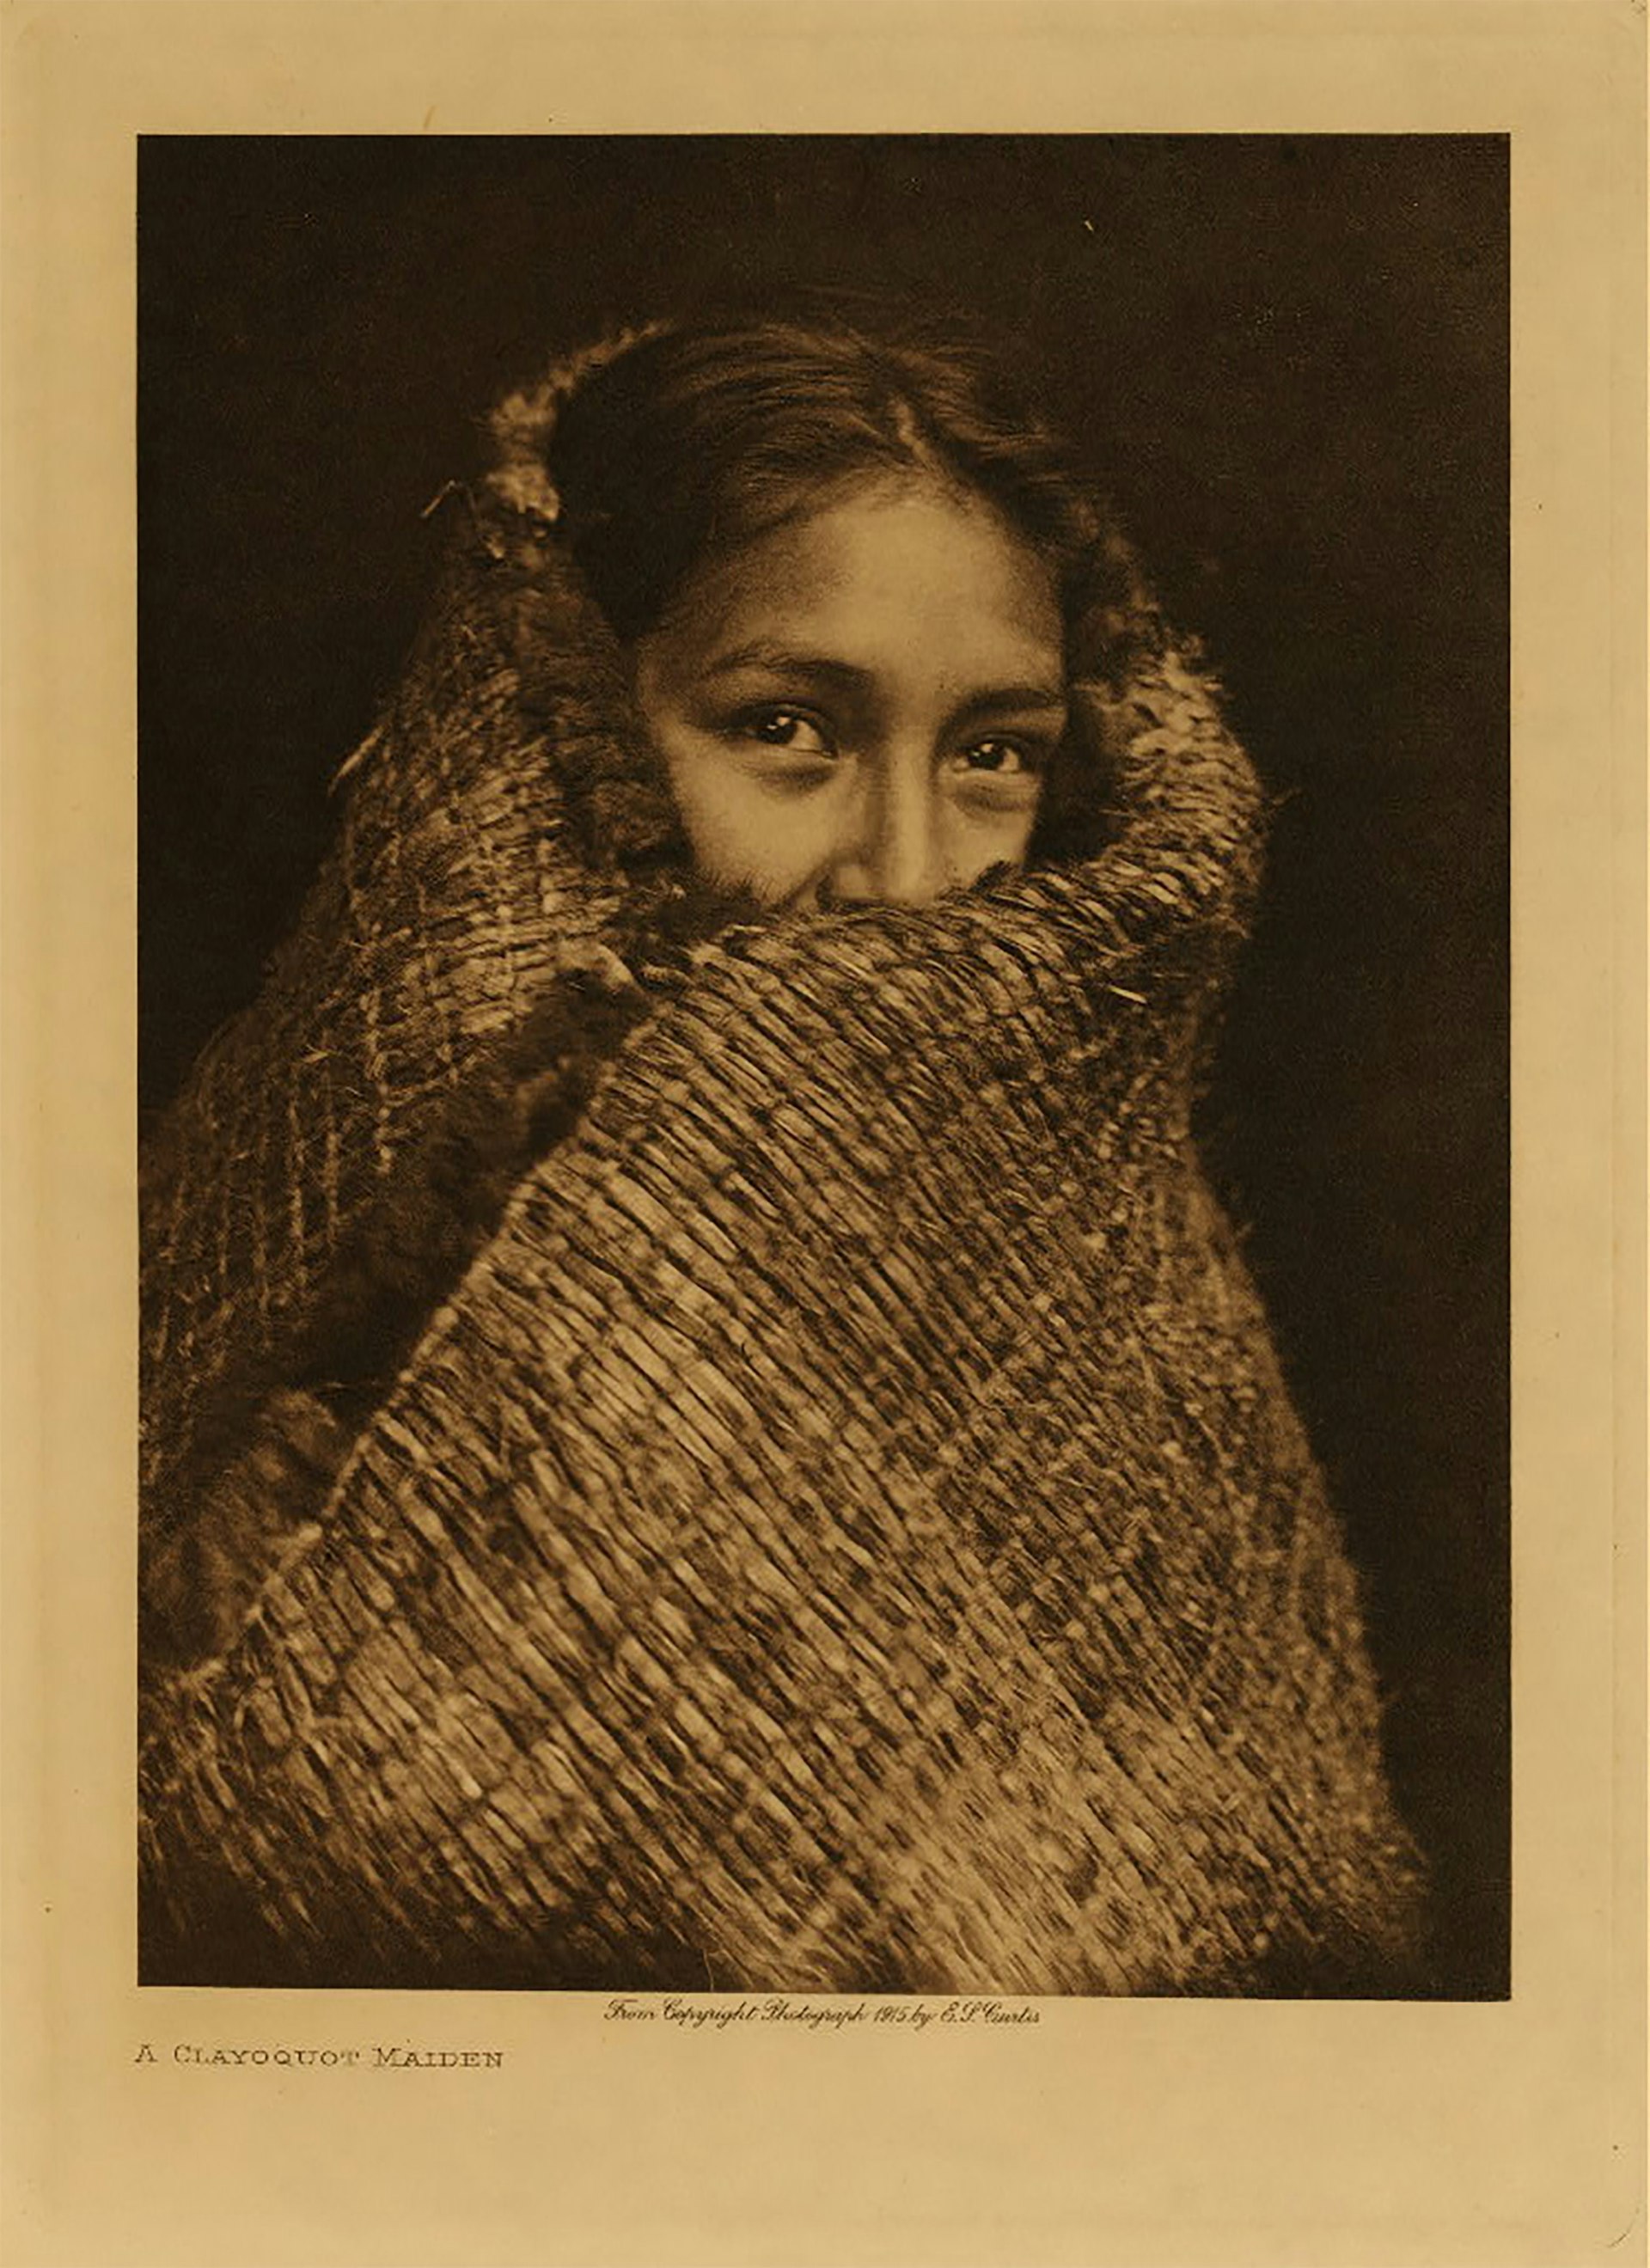 A Clayoquot Maiden, Edward S. Curtis